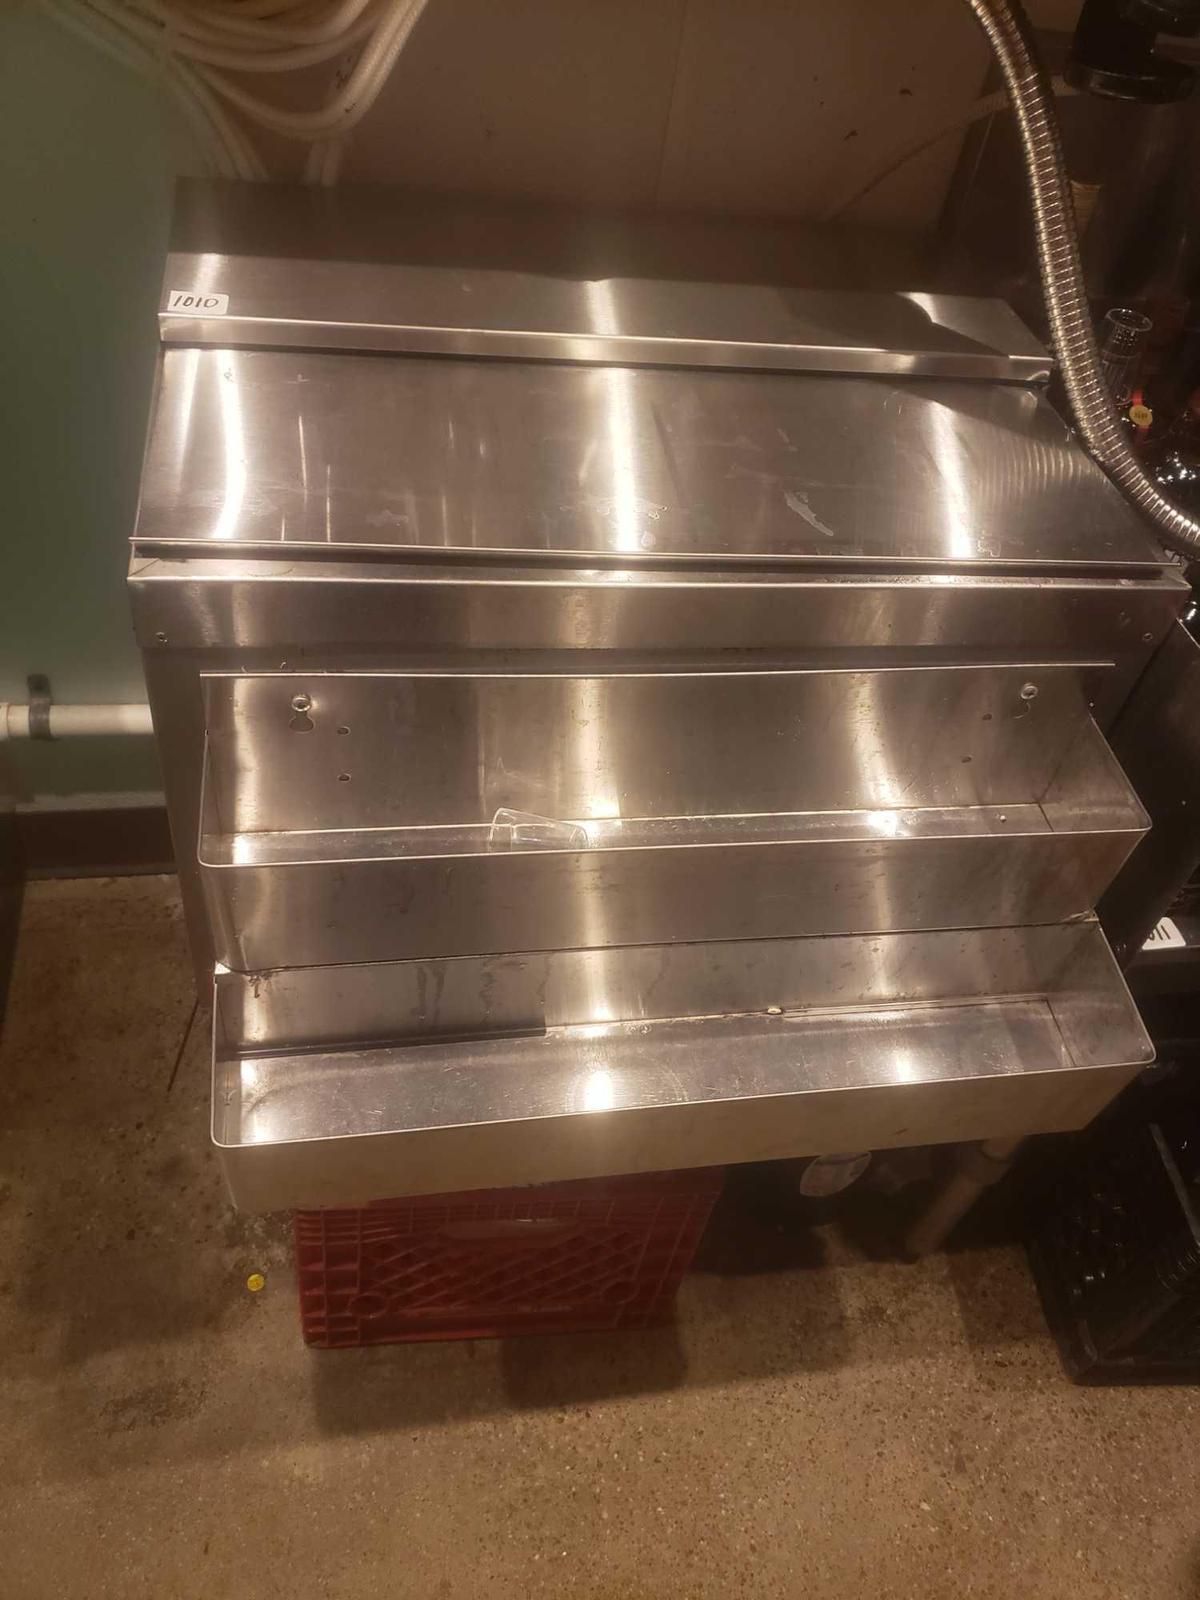 Stainless Micro Matic ice chest storge unit L 24in, x W 17in, x H 31in comes with disatachable